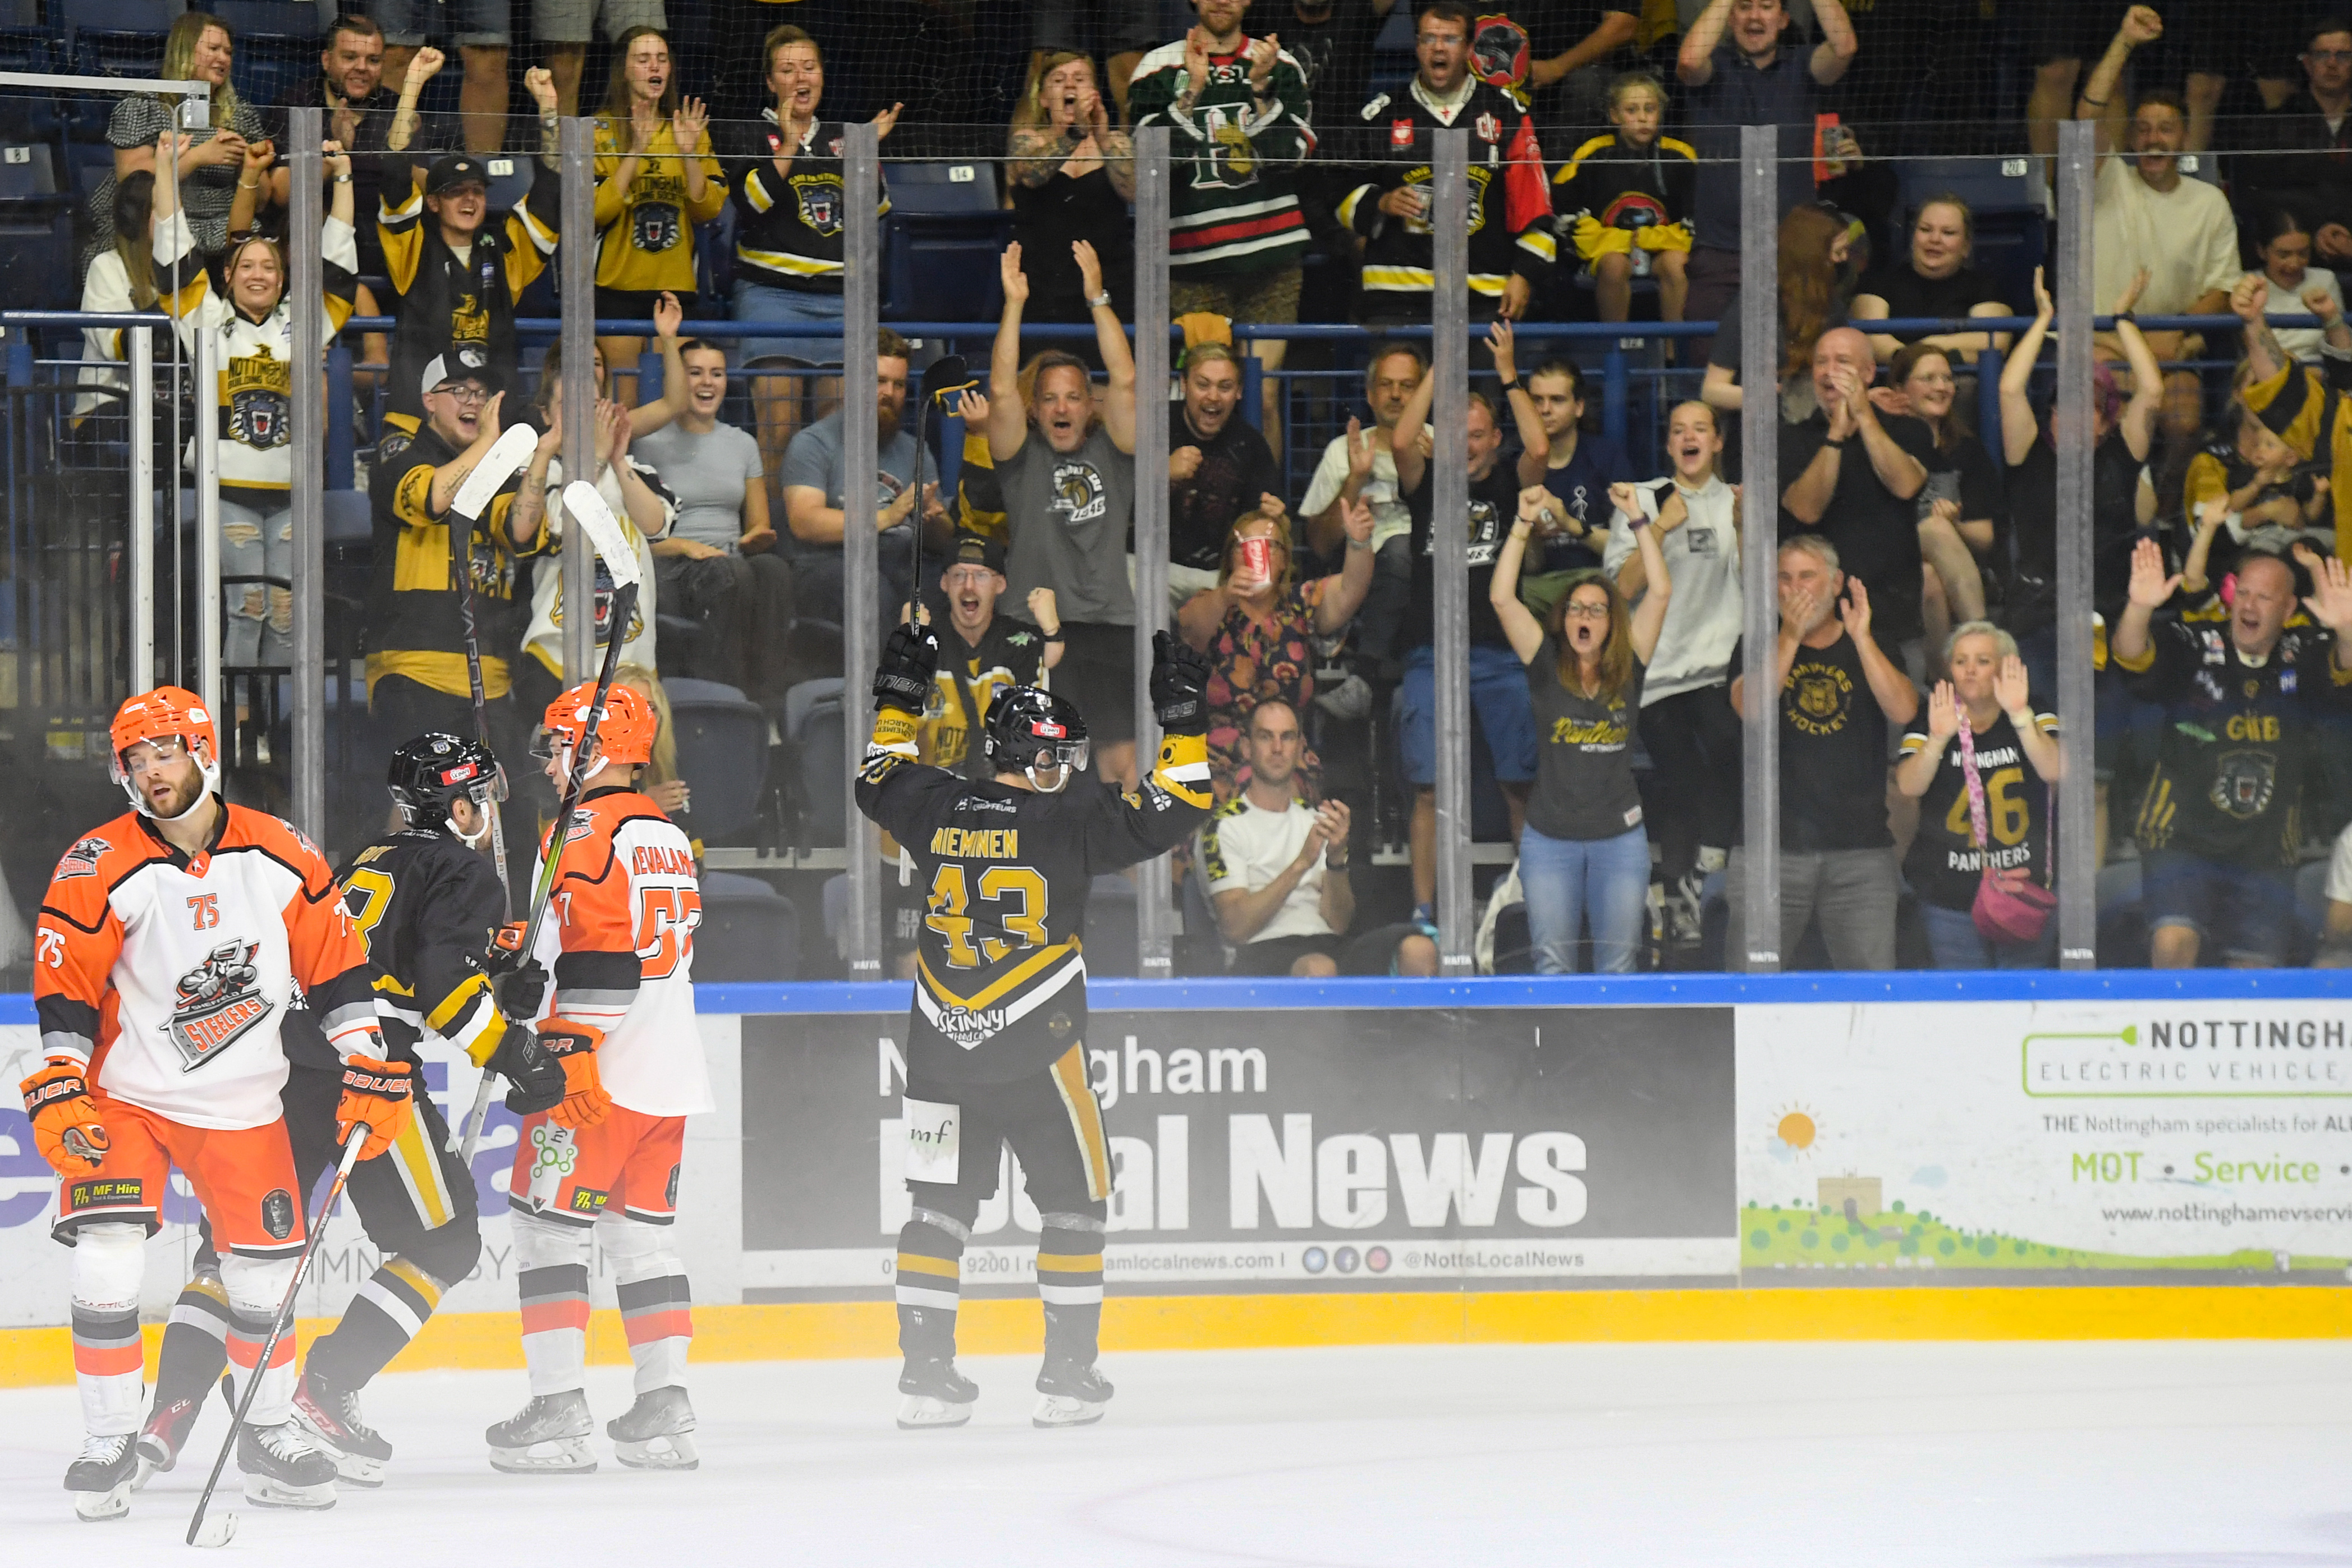 PANTHERS HOST STEELERS IN THE CUP TONIGHT Top Image